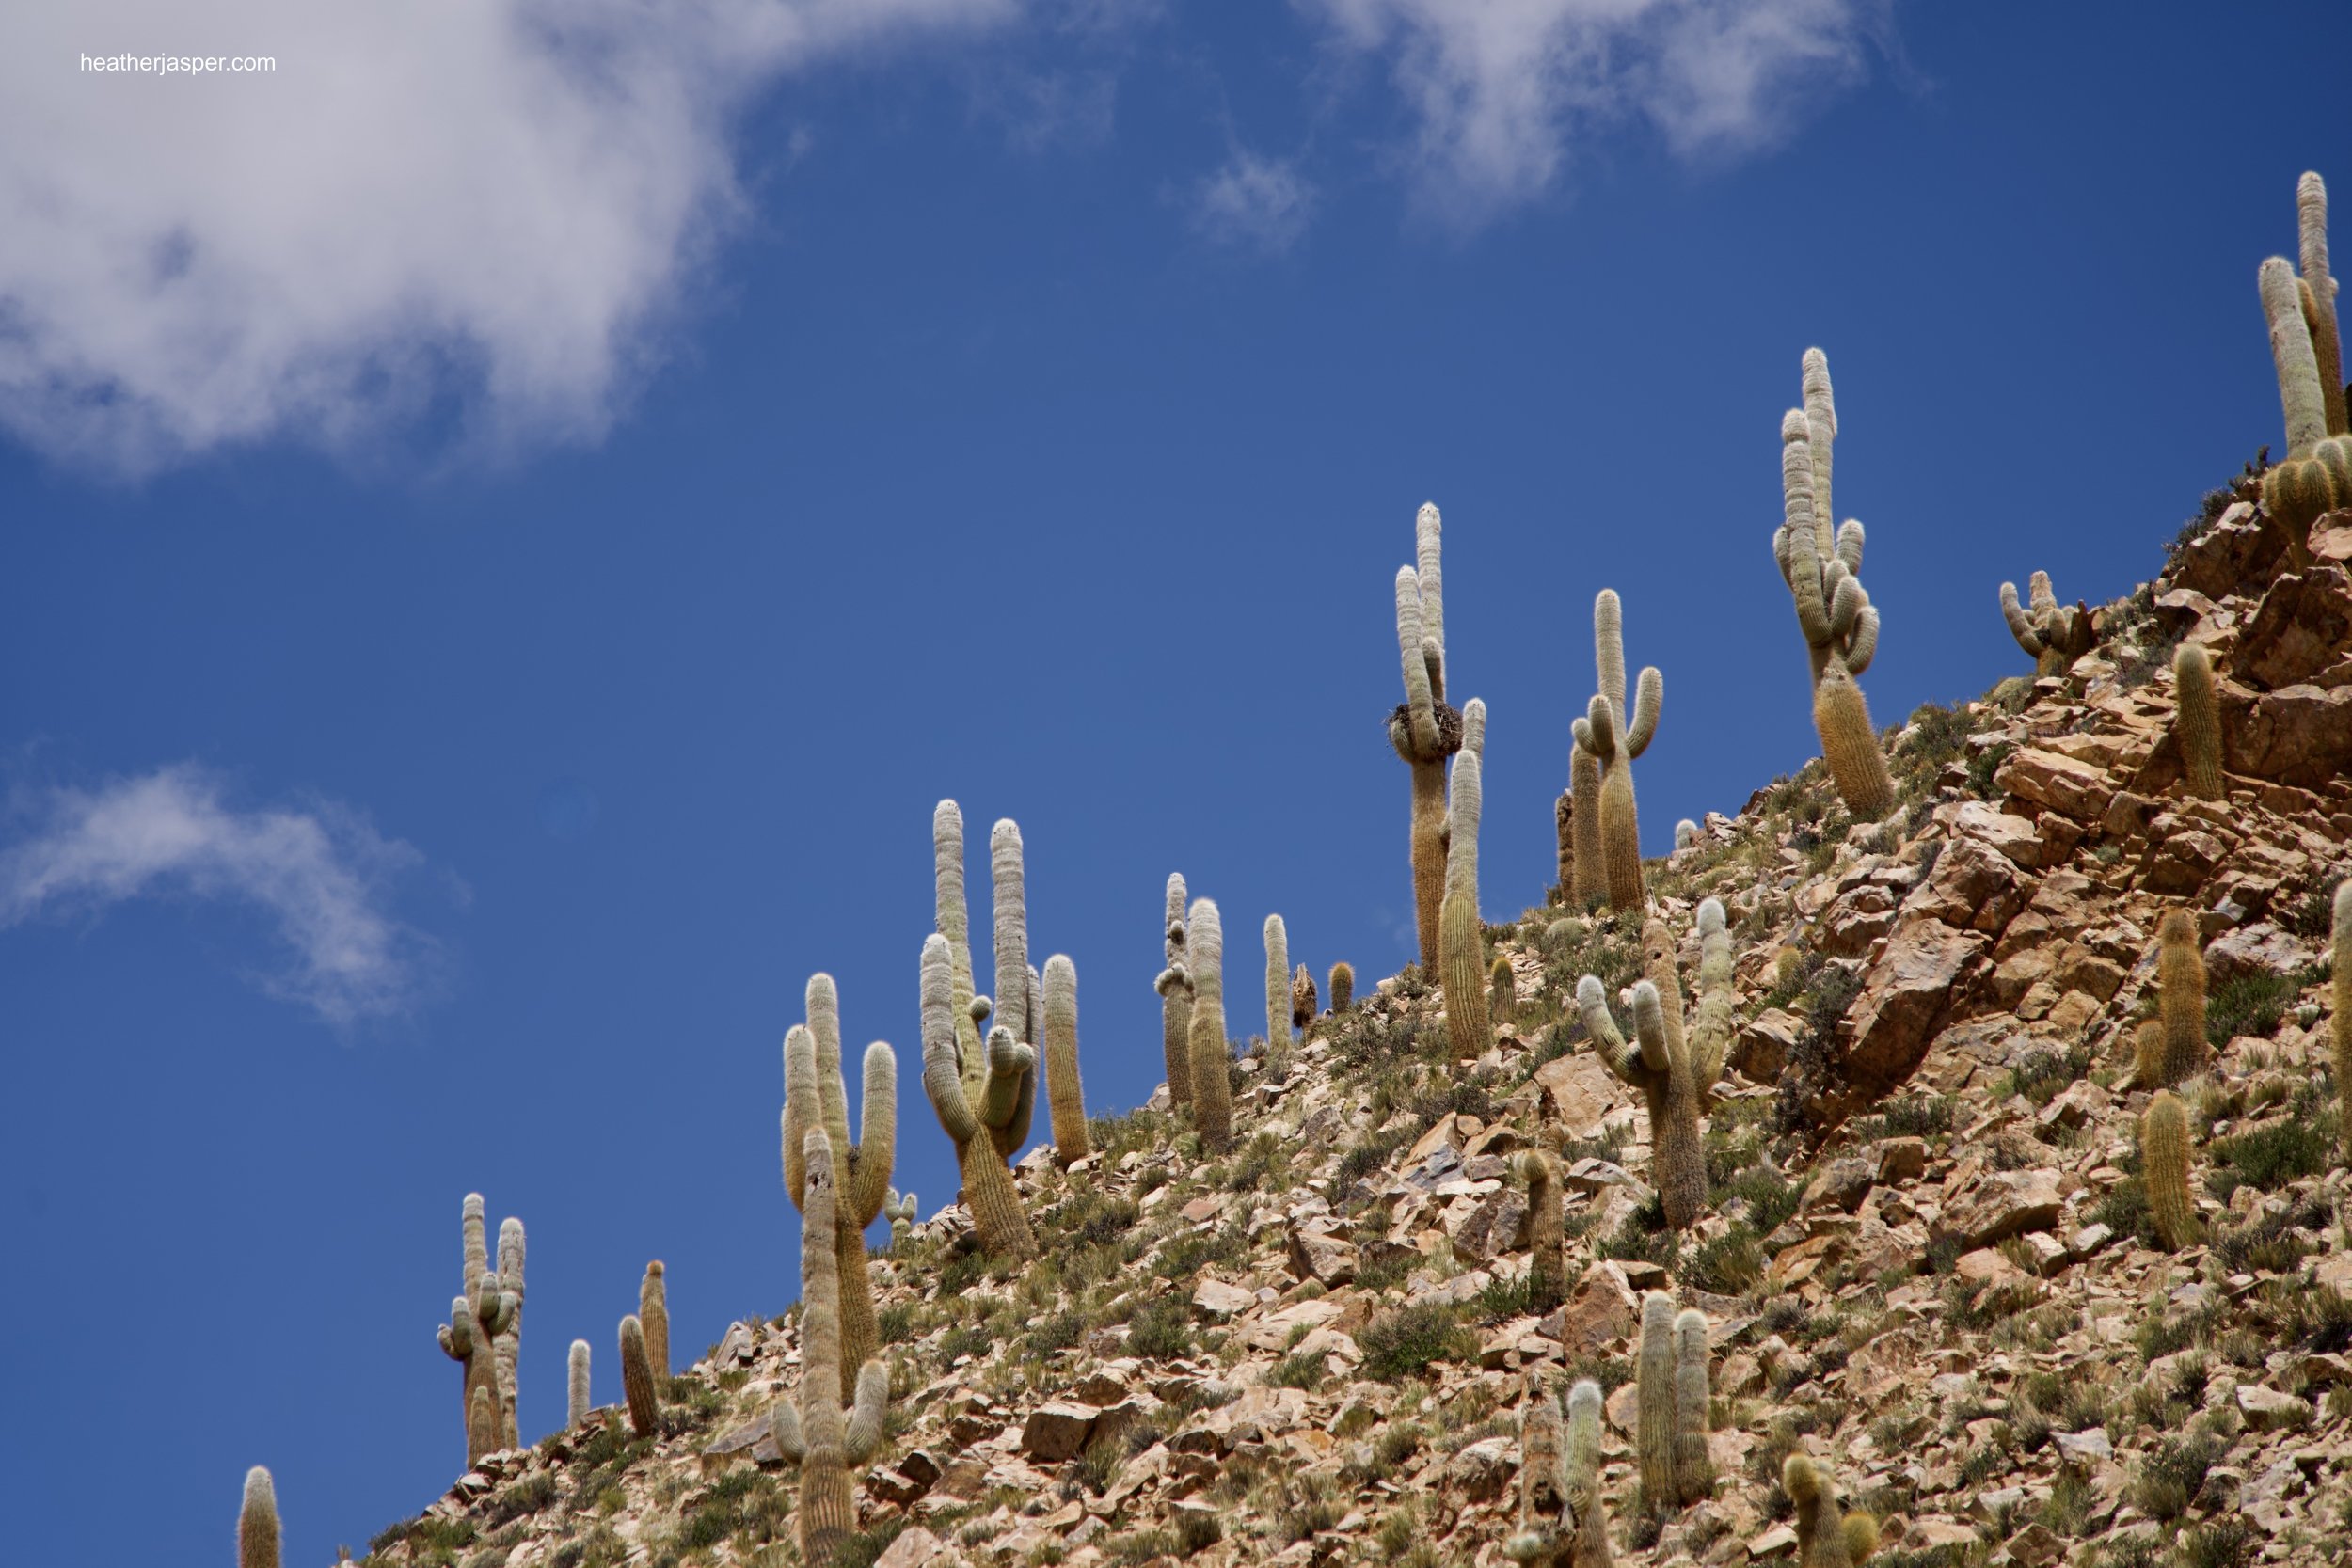 Cactus line the hills that ring the salt flats.